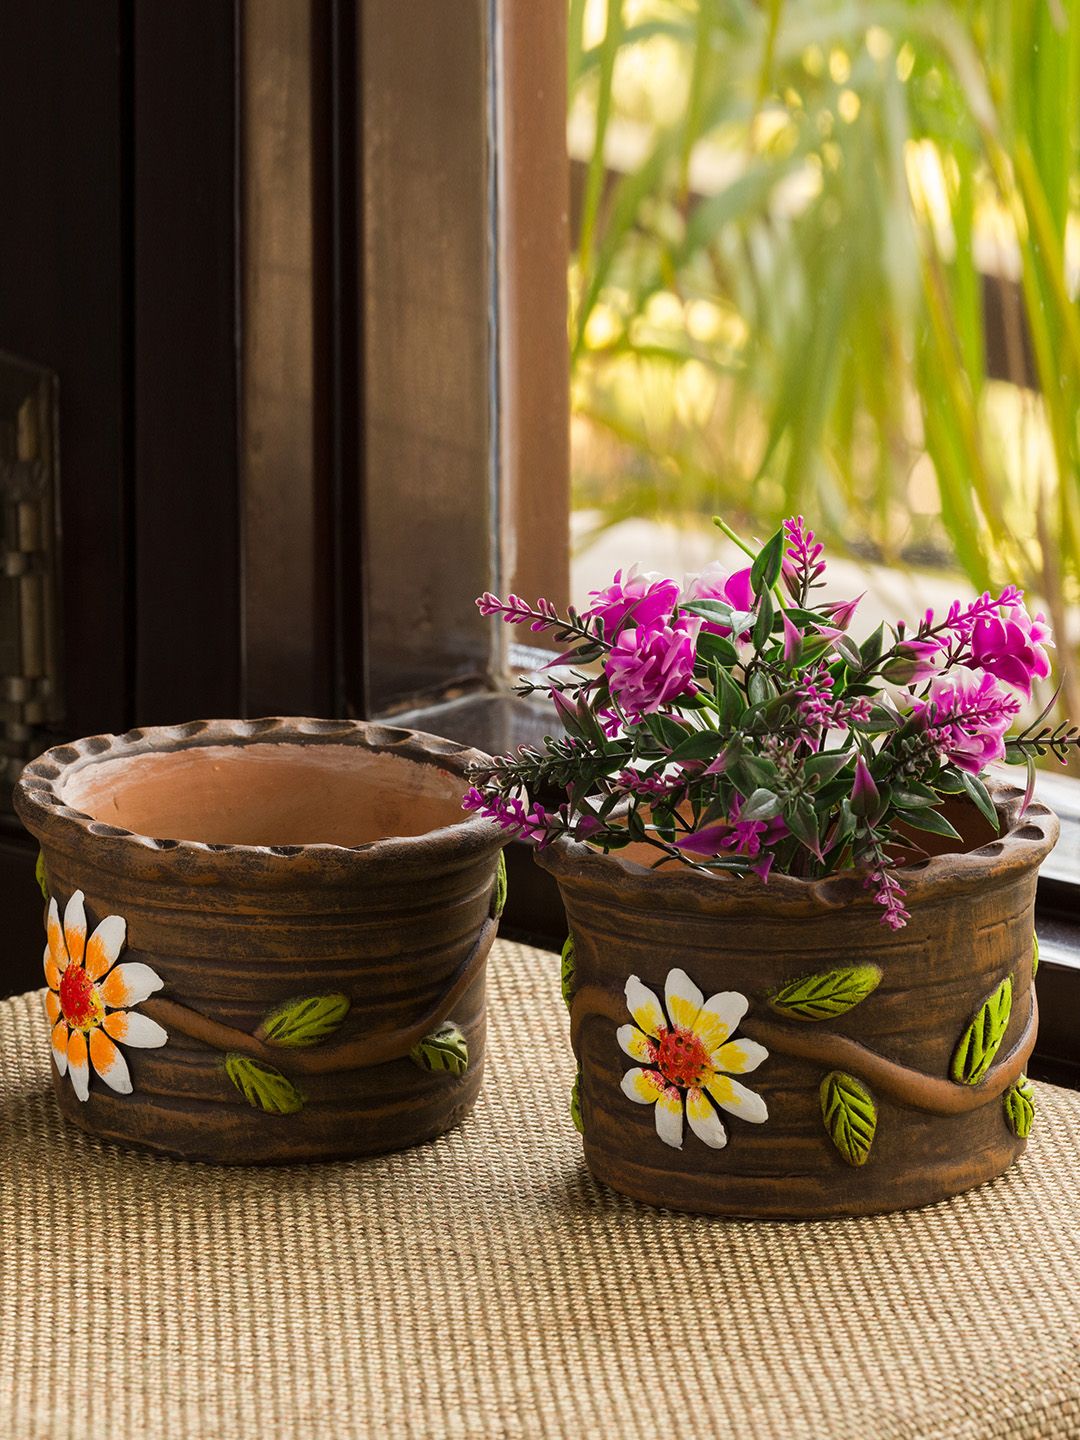 ExclusiveLane Set of 2 Mud Blossom Handmade Hand-painted Terracotta Table Planter Pots Price in India